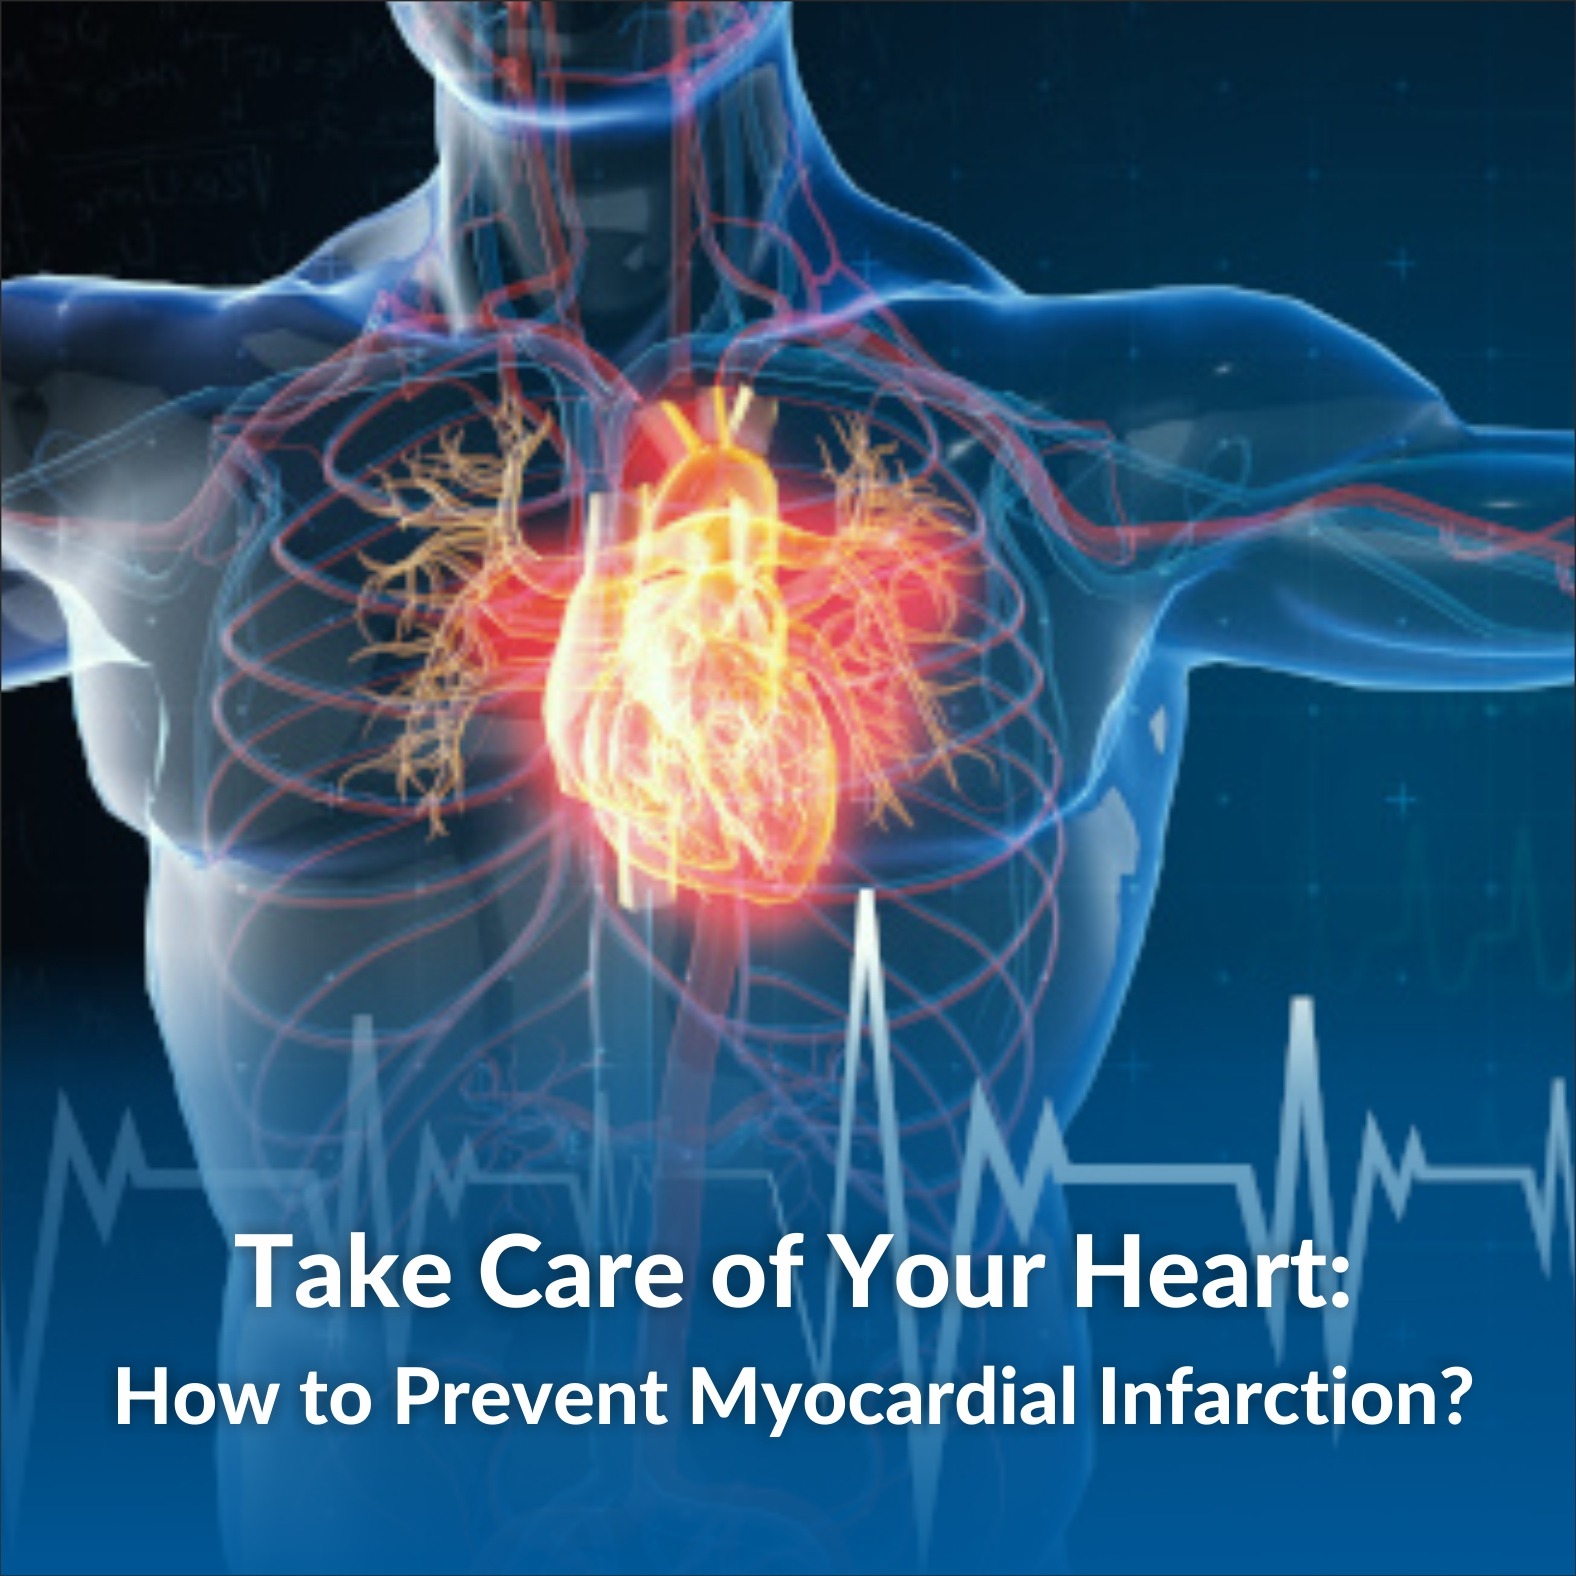 «Take Care of Your Heart: How to Prevent Myocardial Infarction? »